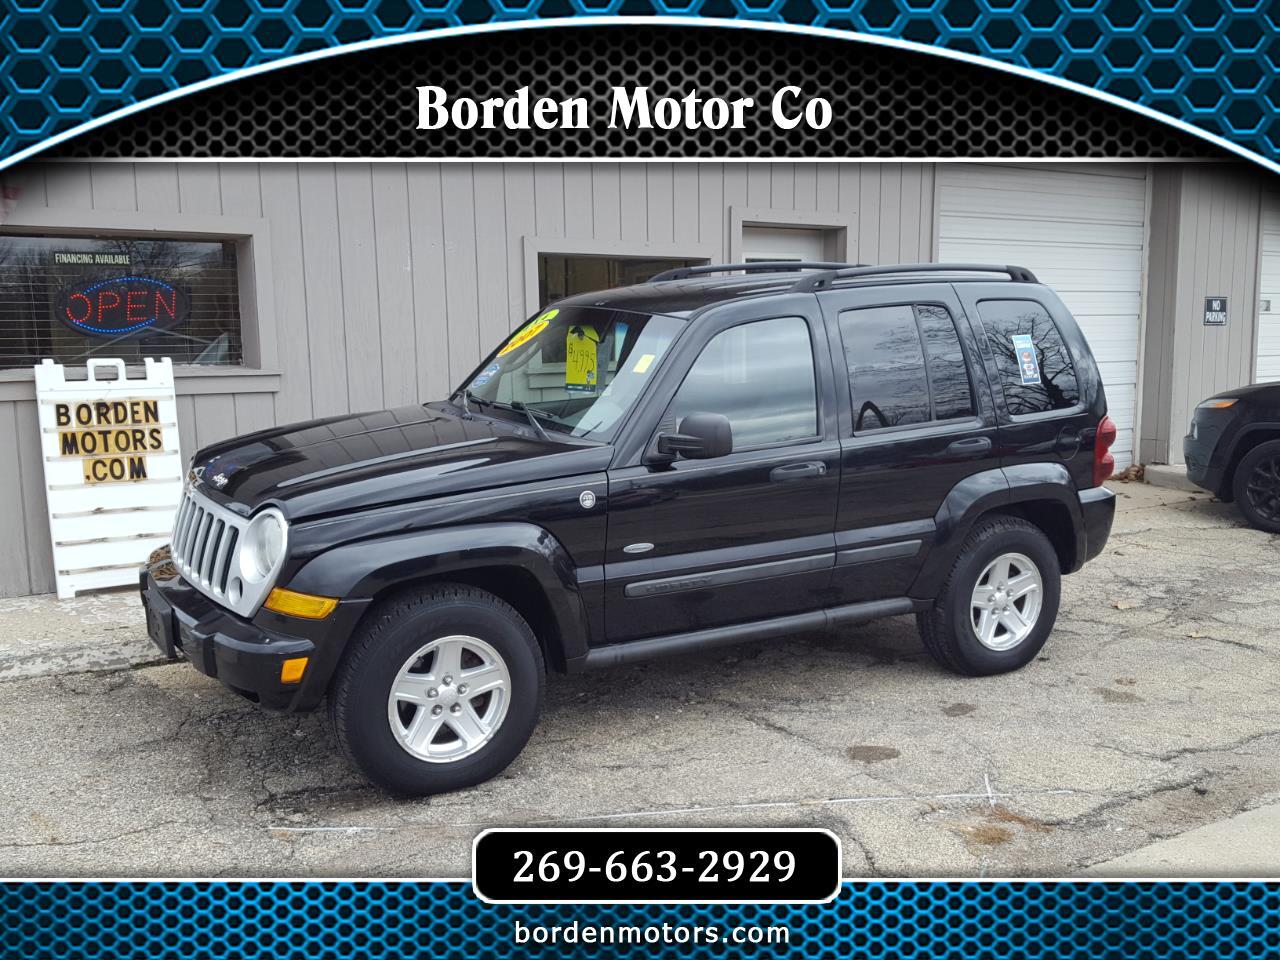 Used 2007 Jeep Liberty 4wd 4dr Sport For Sale In Edwardsburg